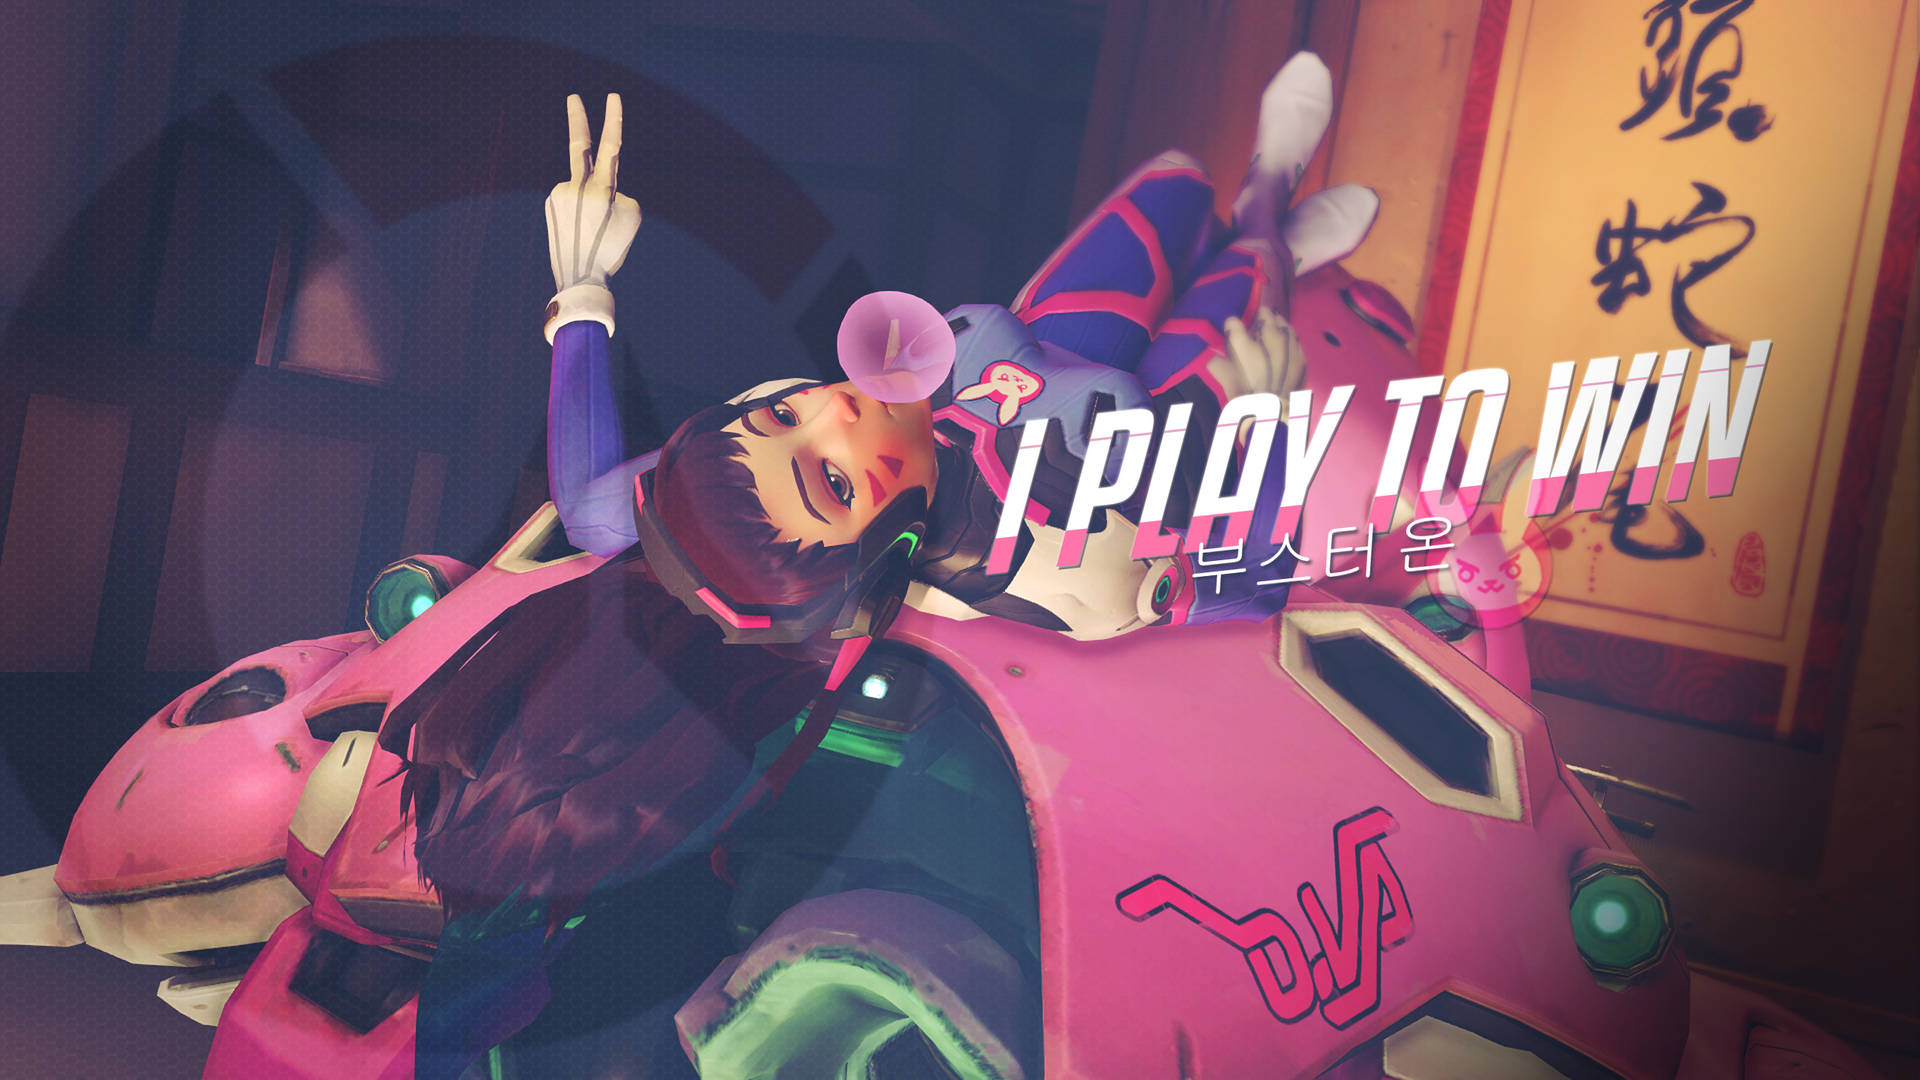 "Make the days sweet with Dva!" Wallpaper